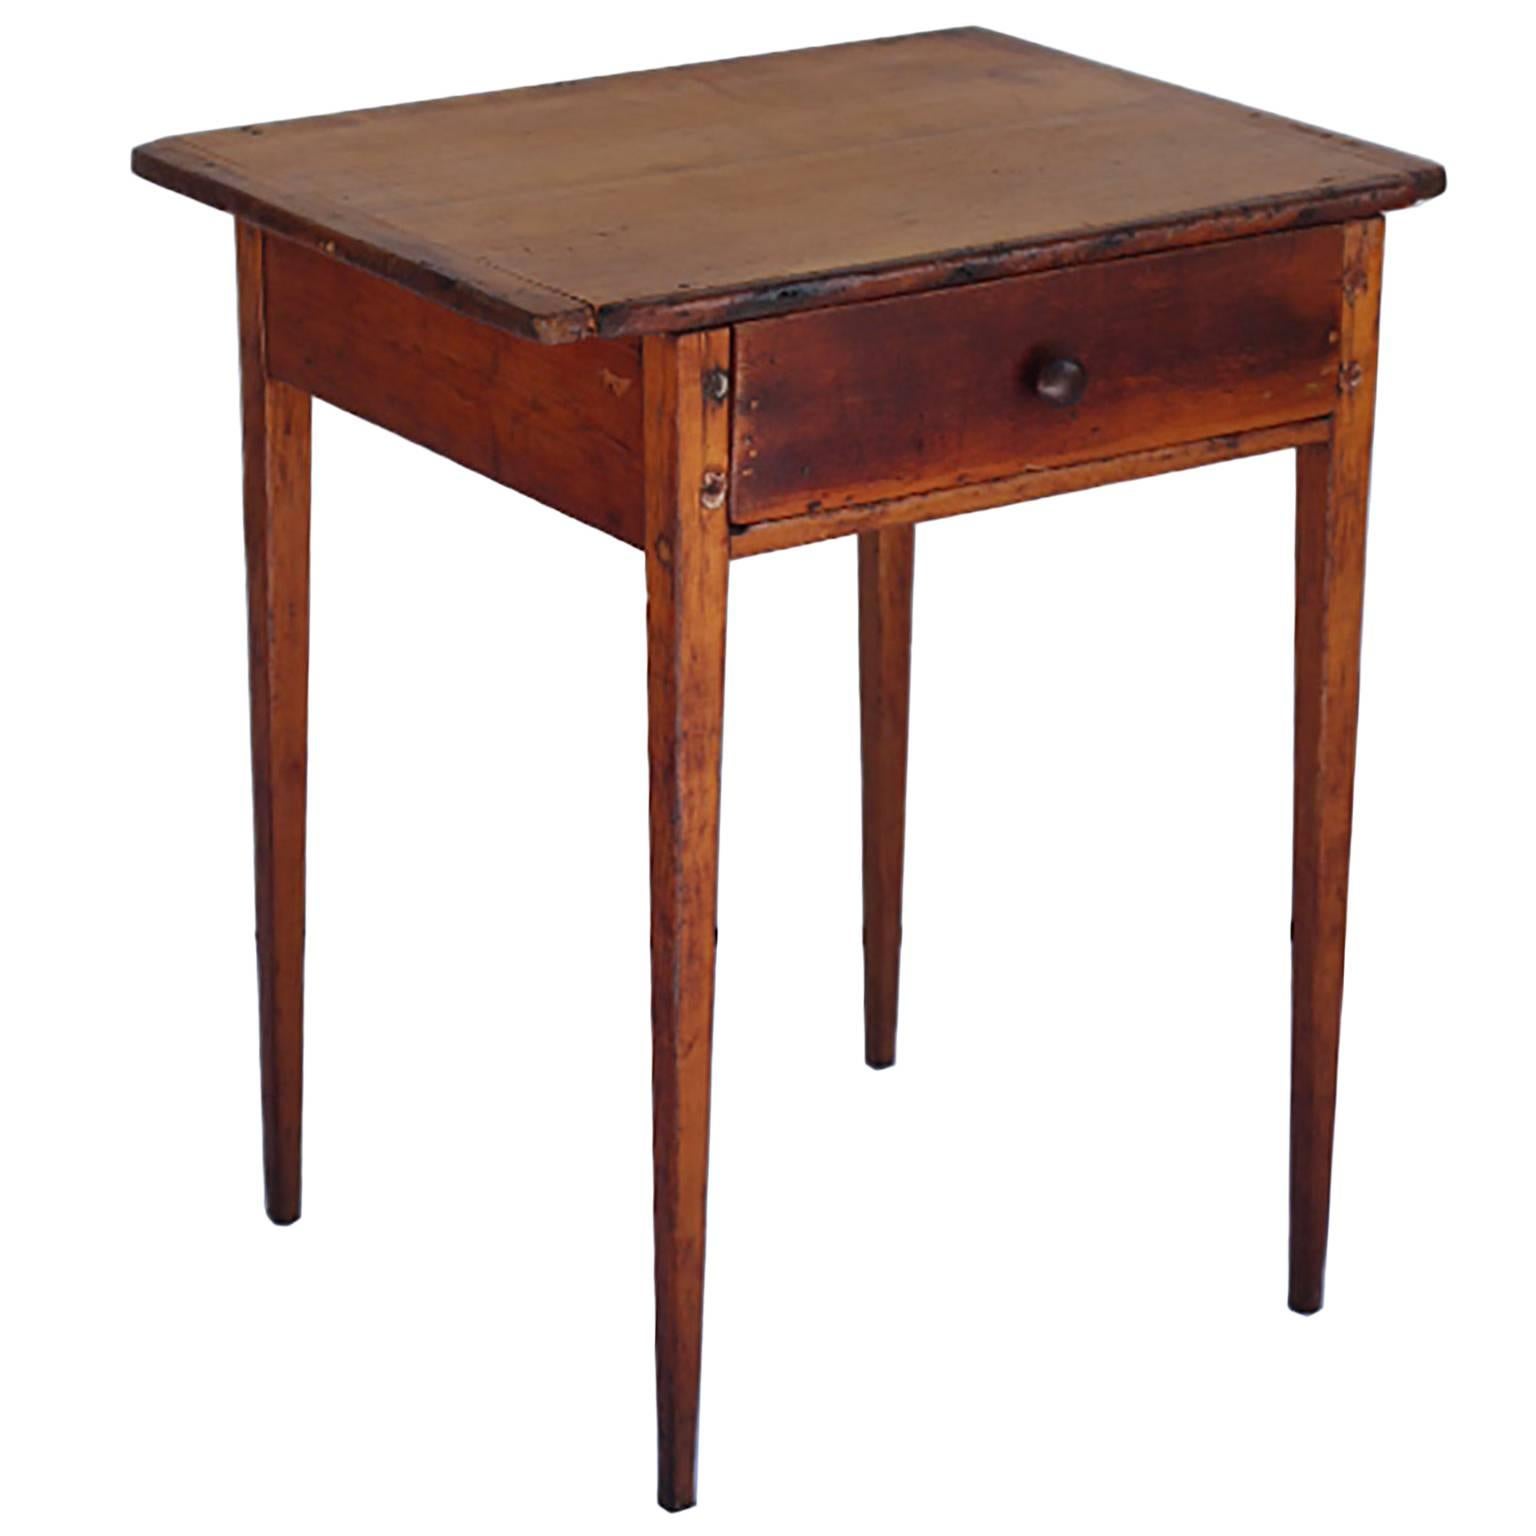 18th c. Rare Cherry and Southern Yellow Pine Side Table c. 1770-1790